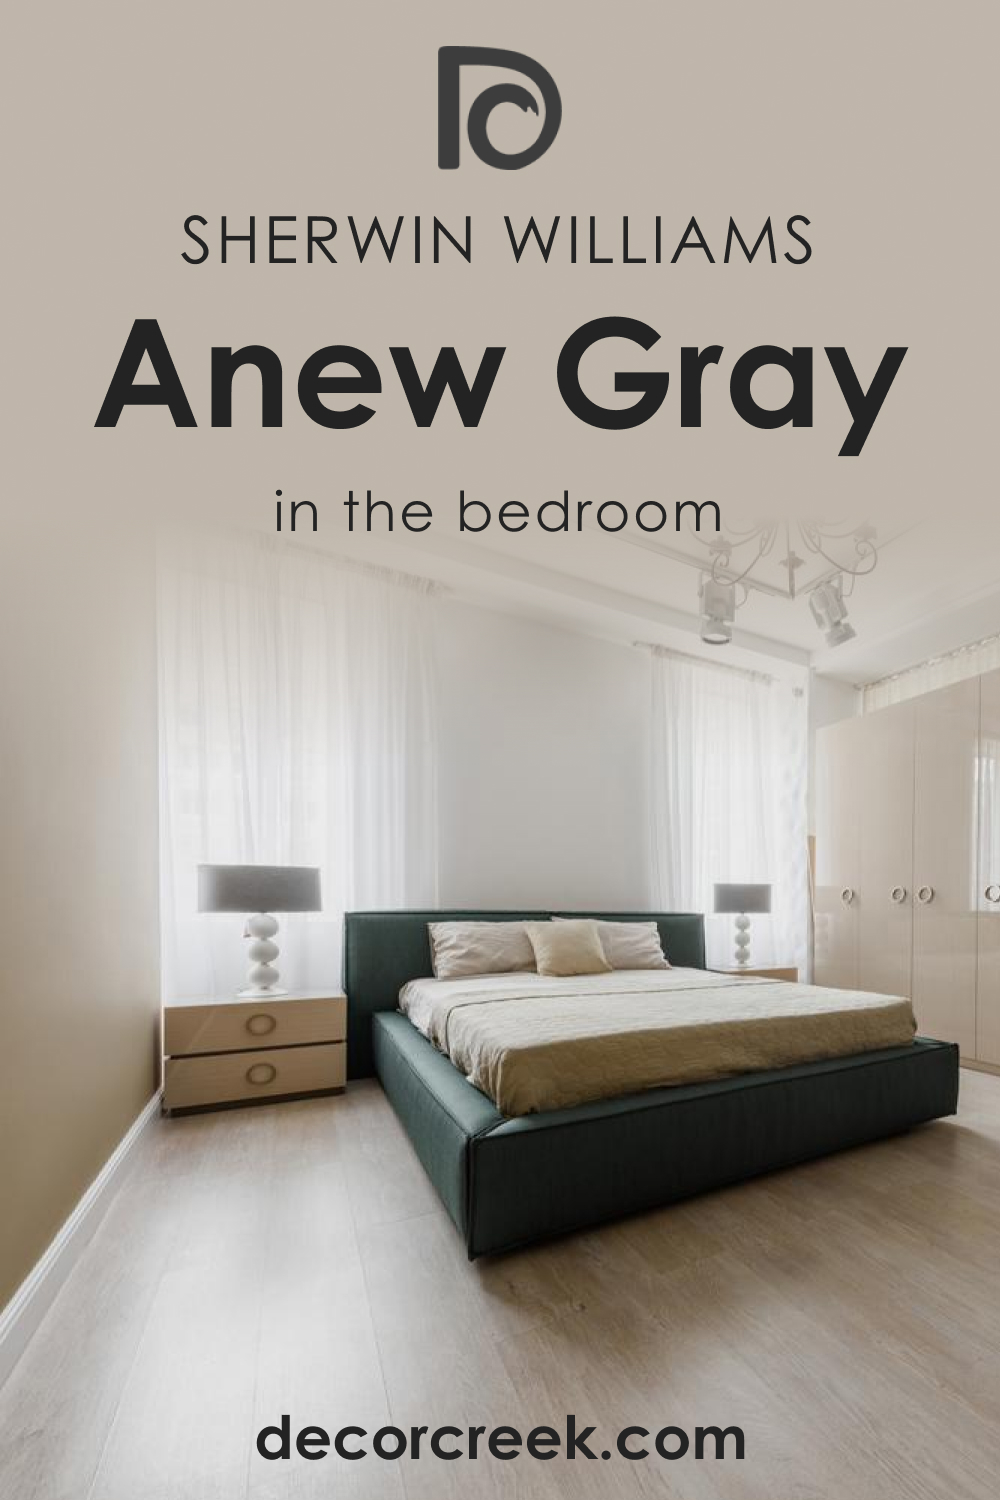 How to Use SW 7030 Anew Gray in the Bedroom?